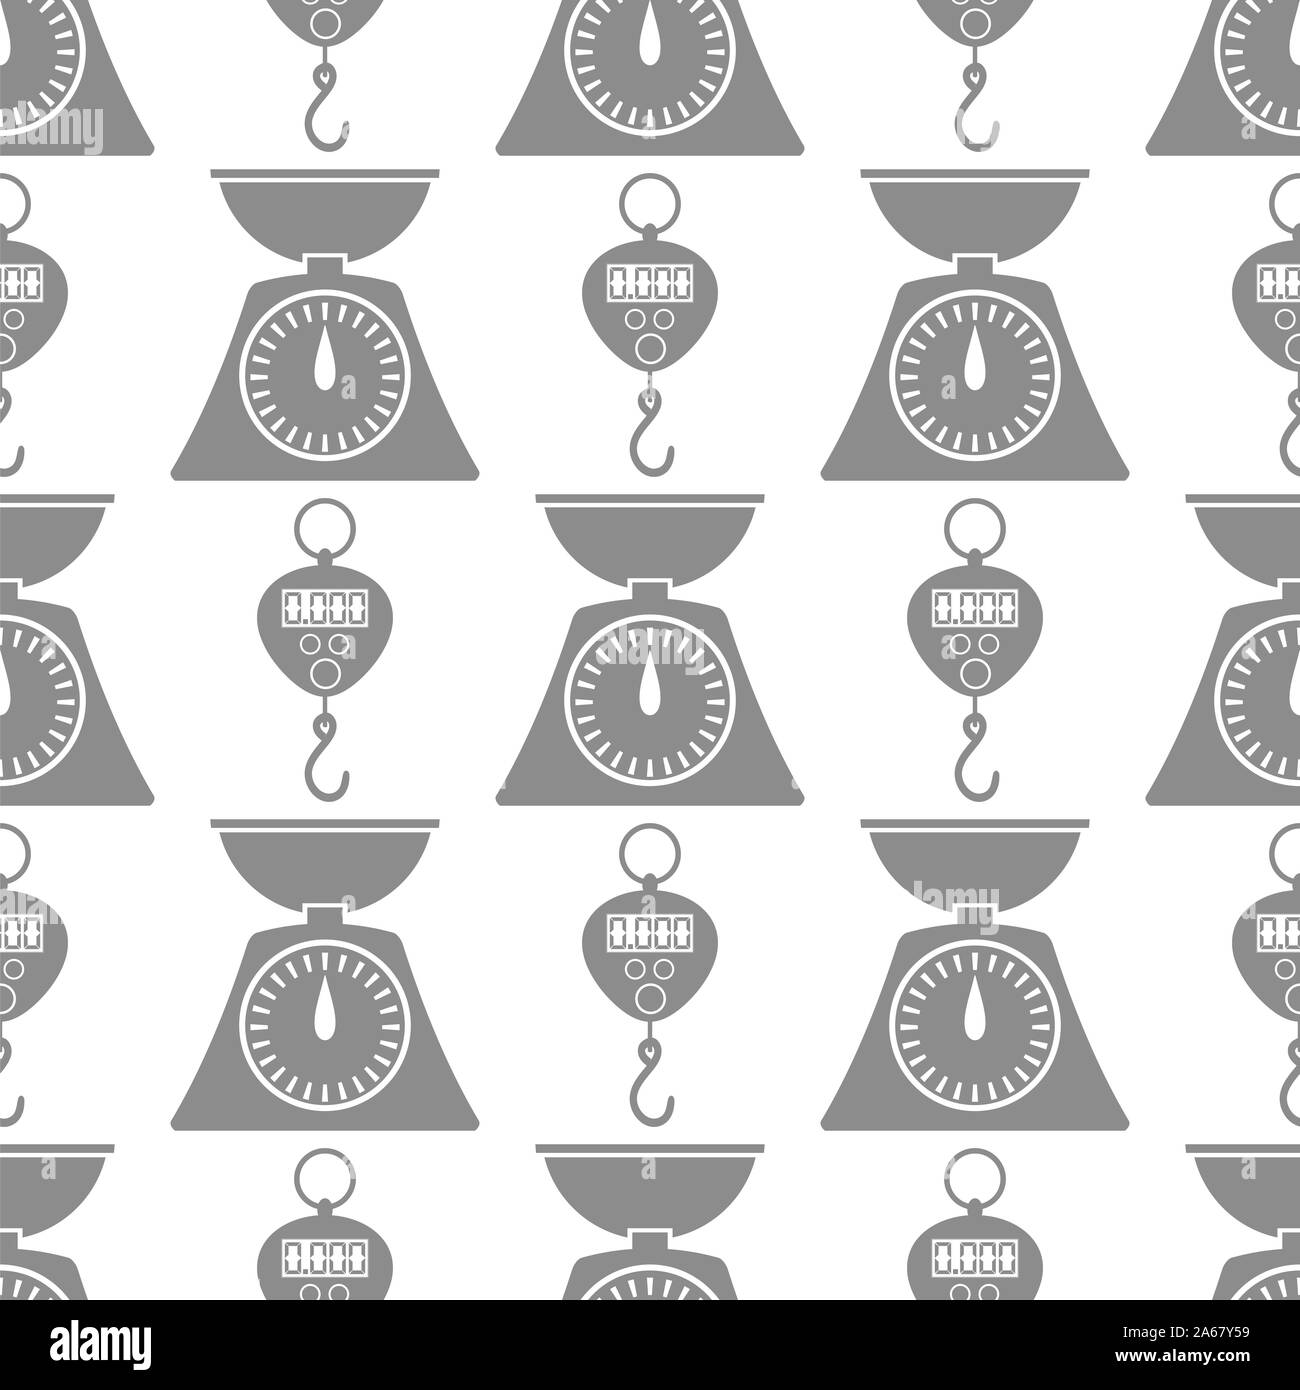 Small scale pattern Black and White Stock Photos & Images - Alamy